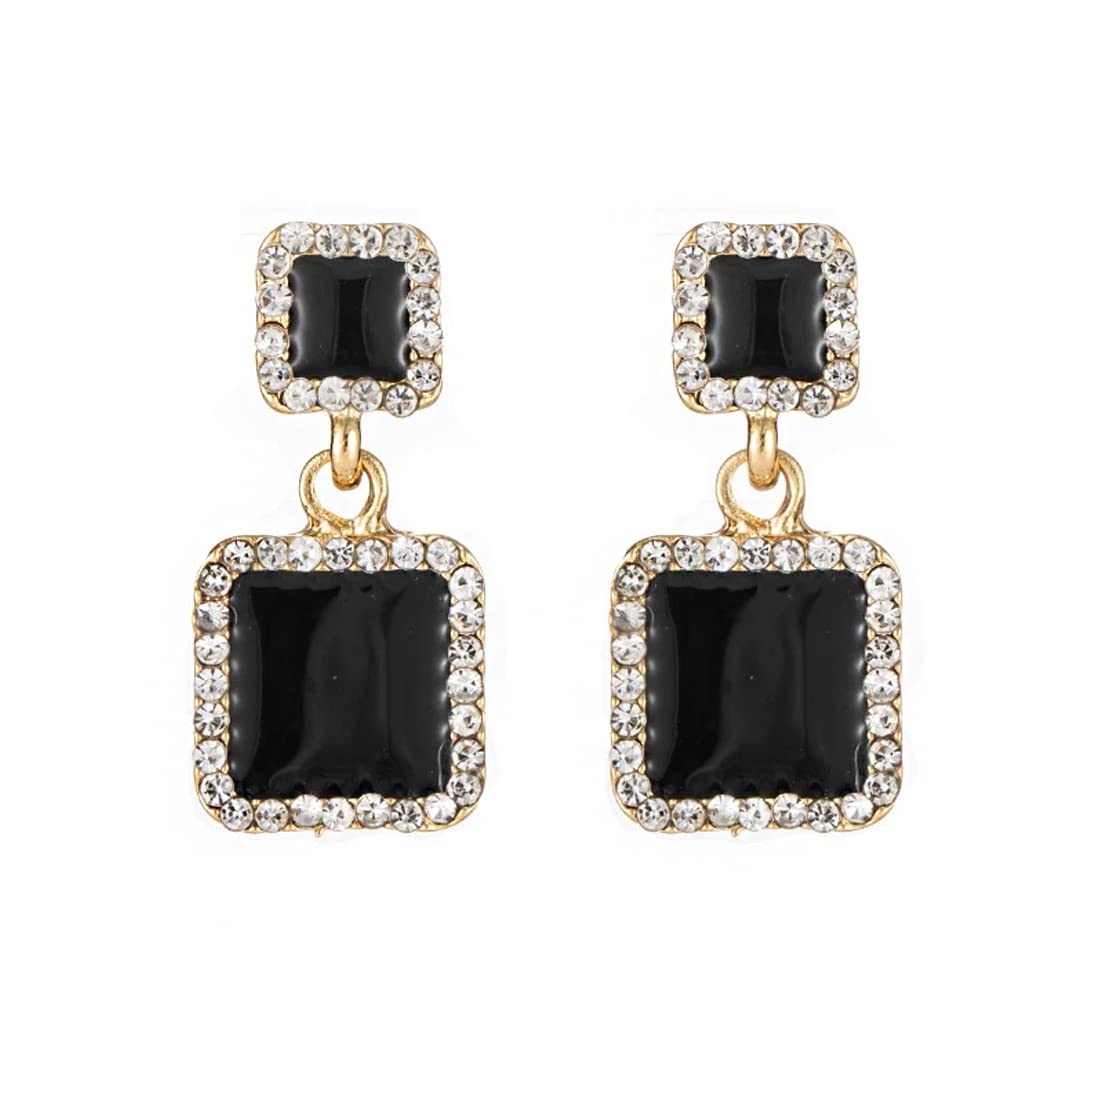 Yellow Chimes Earrings For Women Gold Tone Crystal Black color Rectangular Shape Stud Drop Earrings For Women and Girls